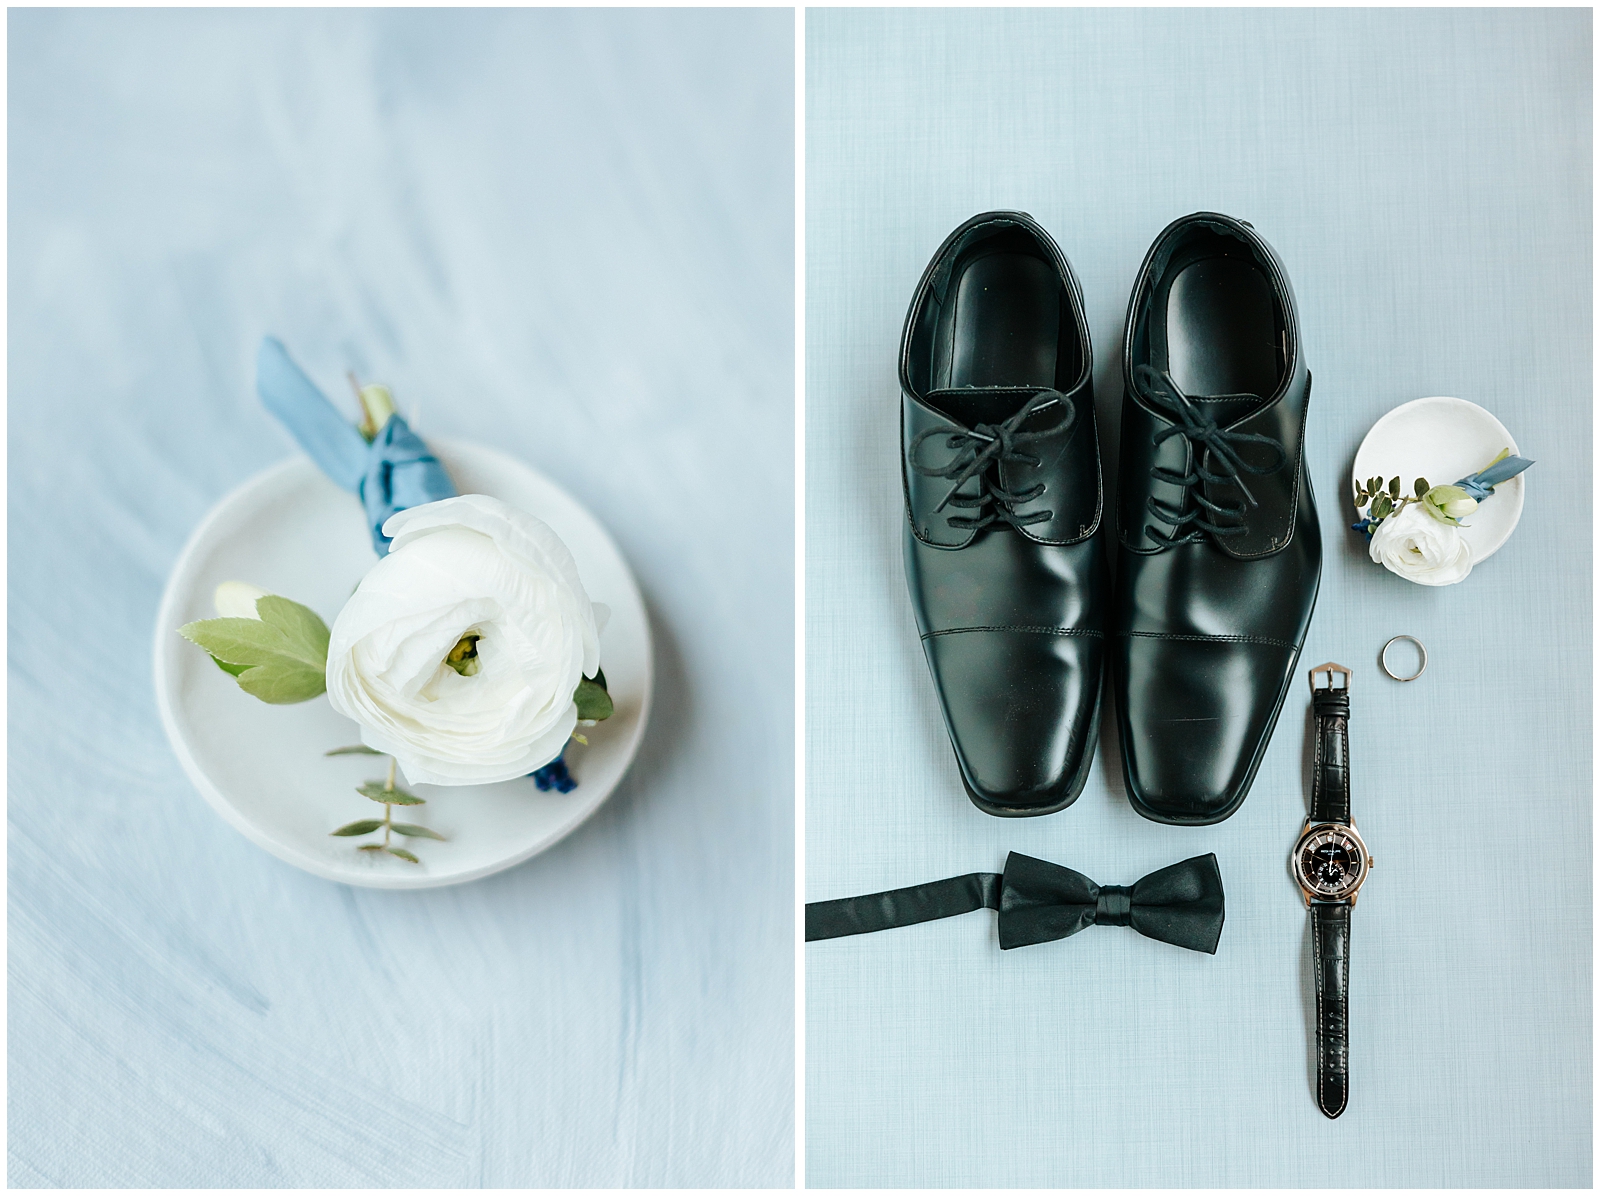 The Groom's Details - Patek Philippe Watch, Black Bow Tie and Boutionniere